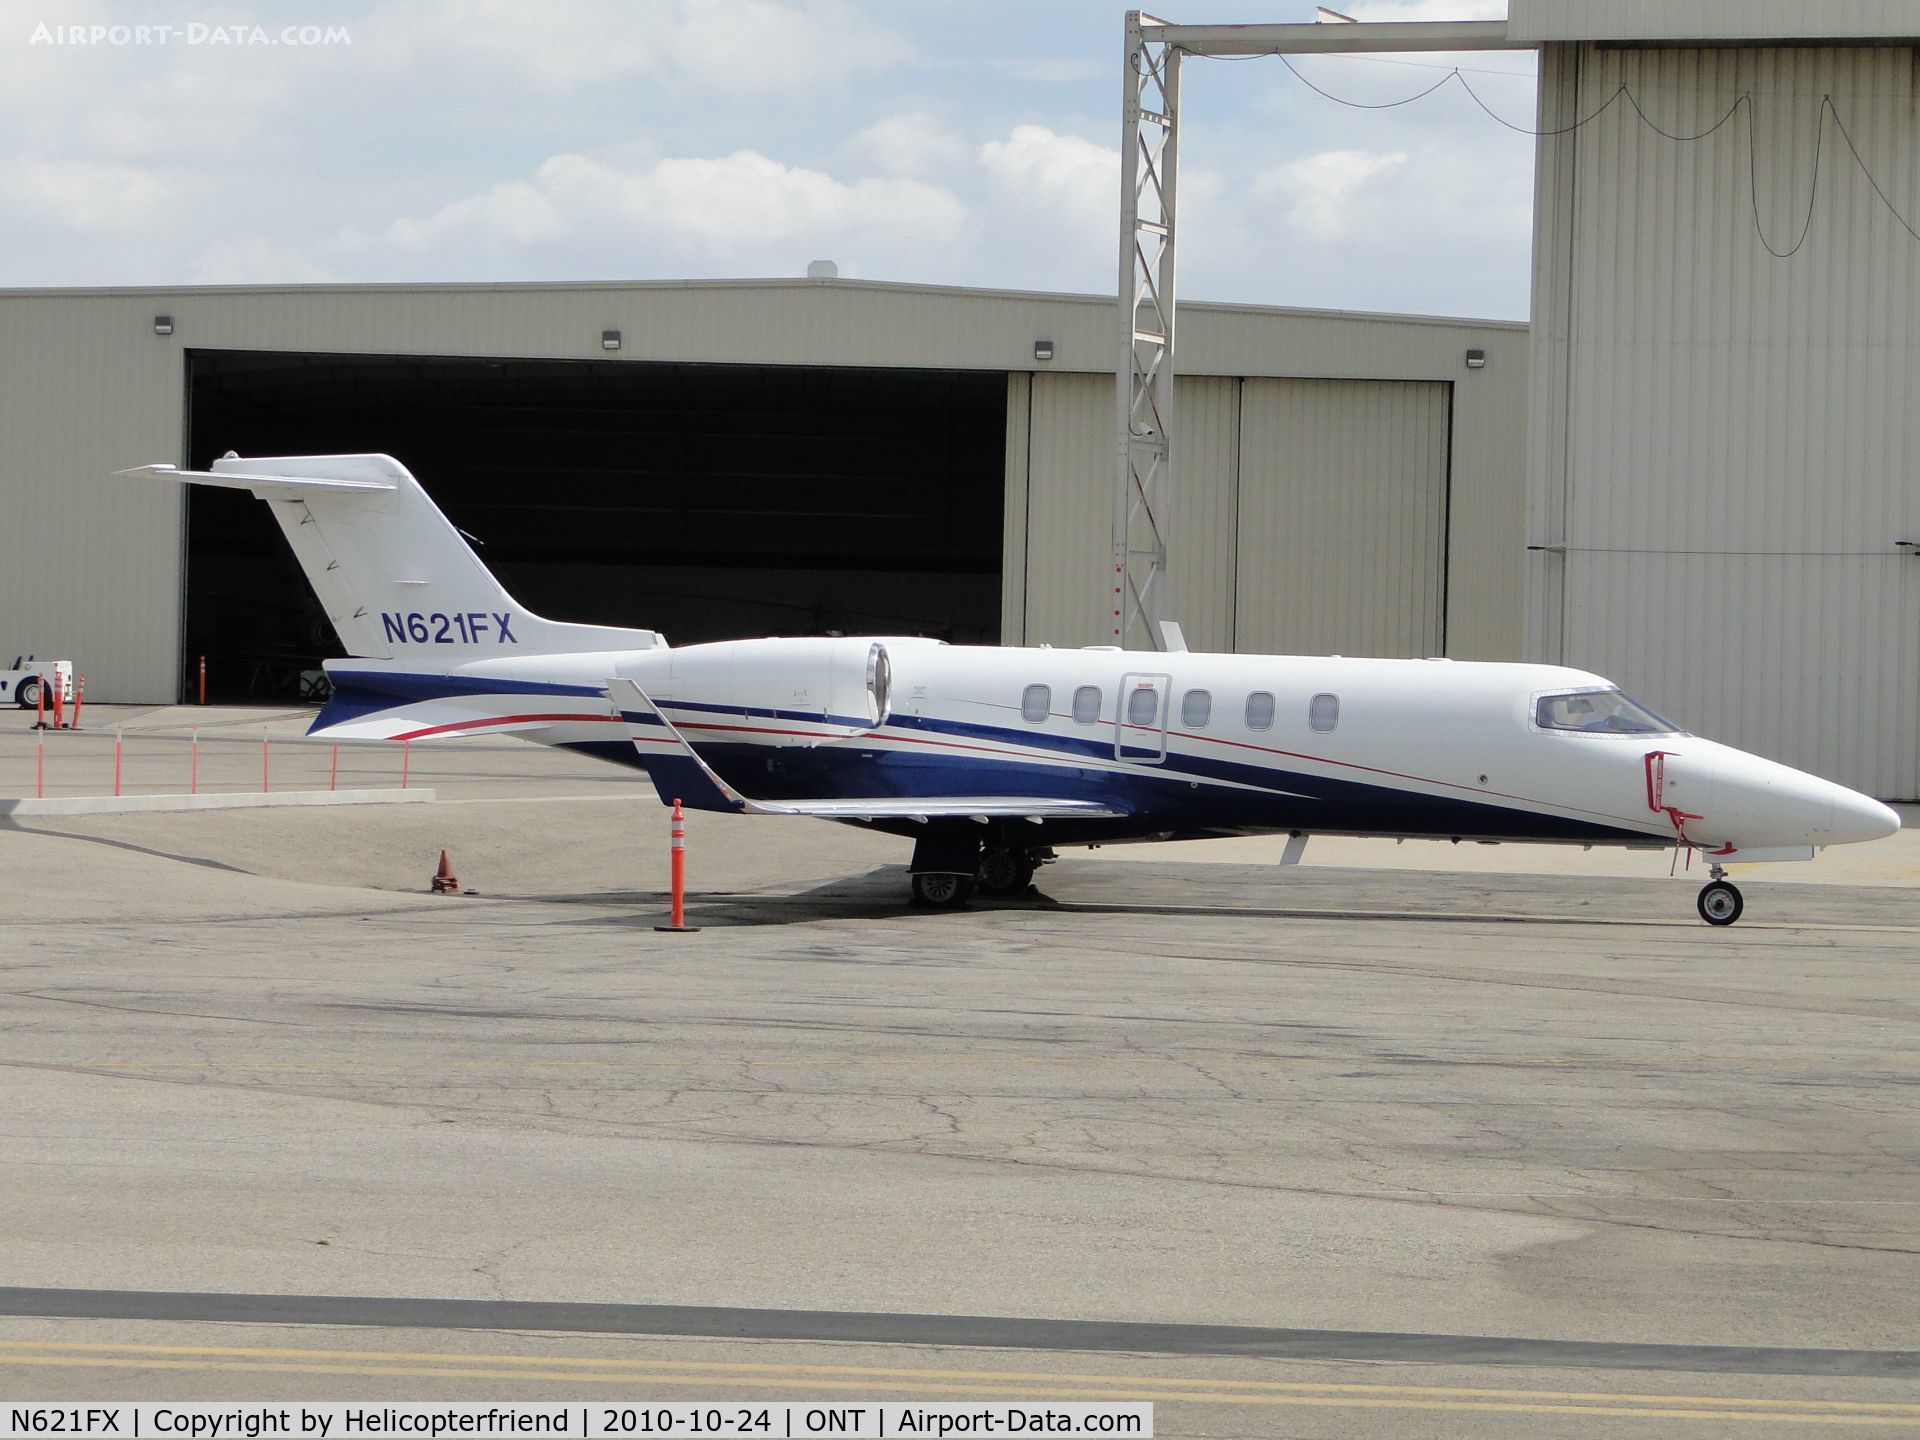 N621FX, 2007 Learjet Inc 45 C/N 2089, Parked on the southside